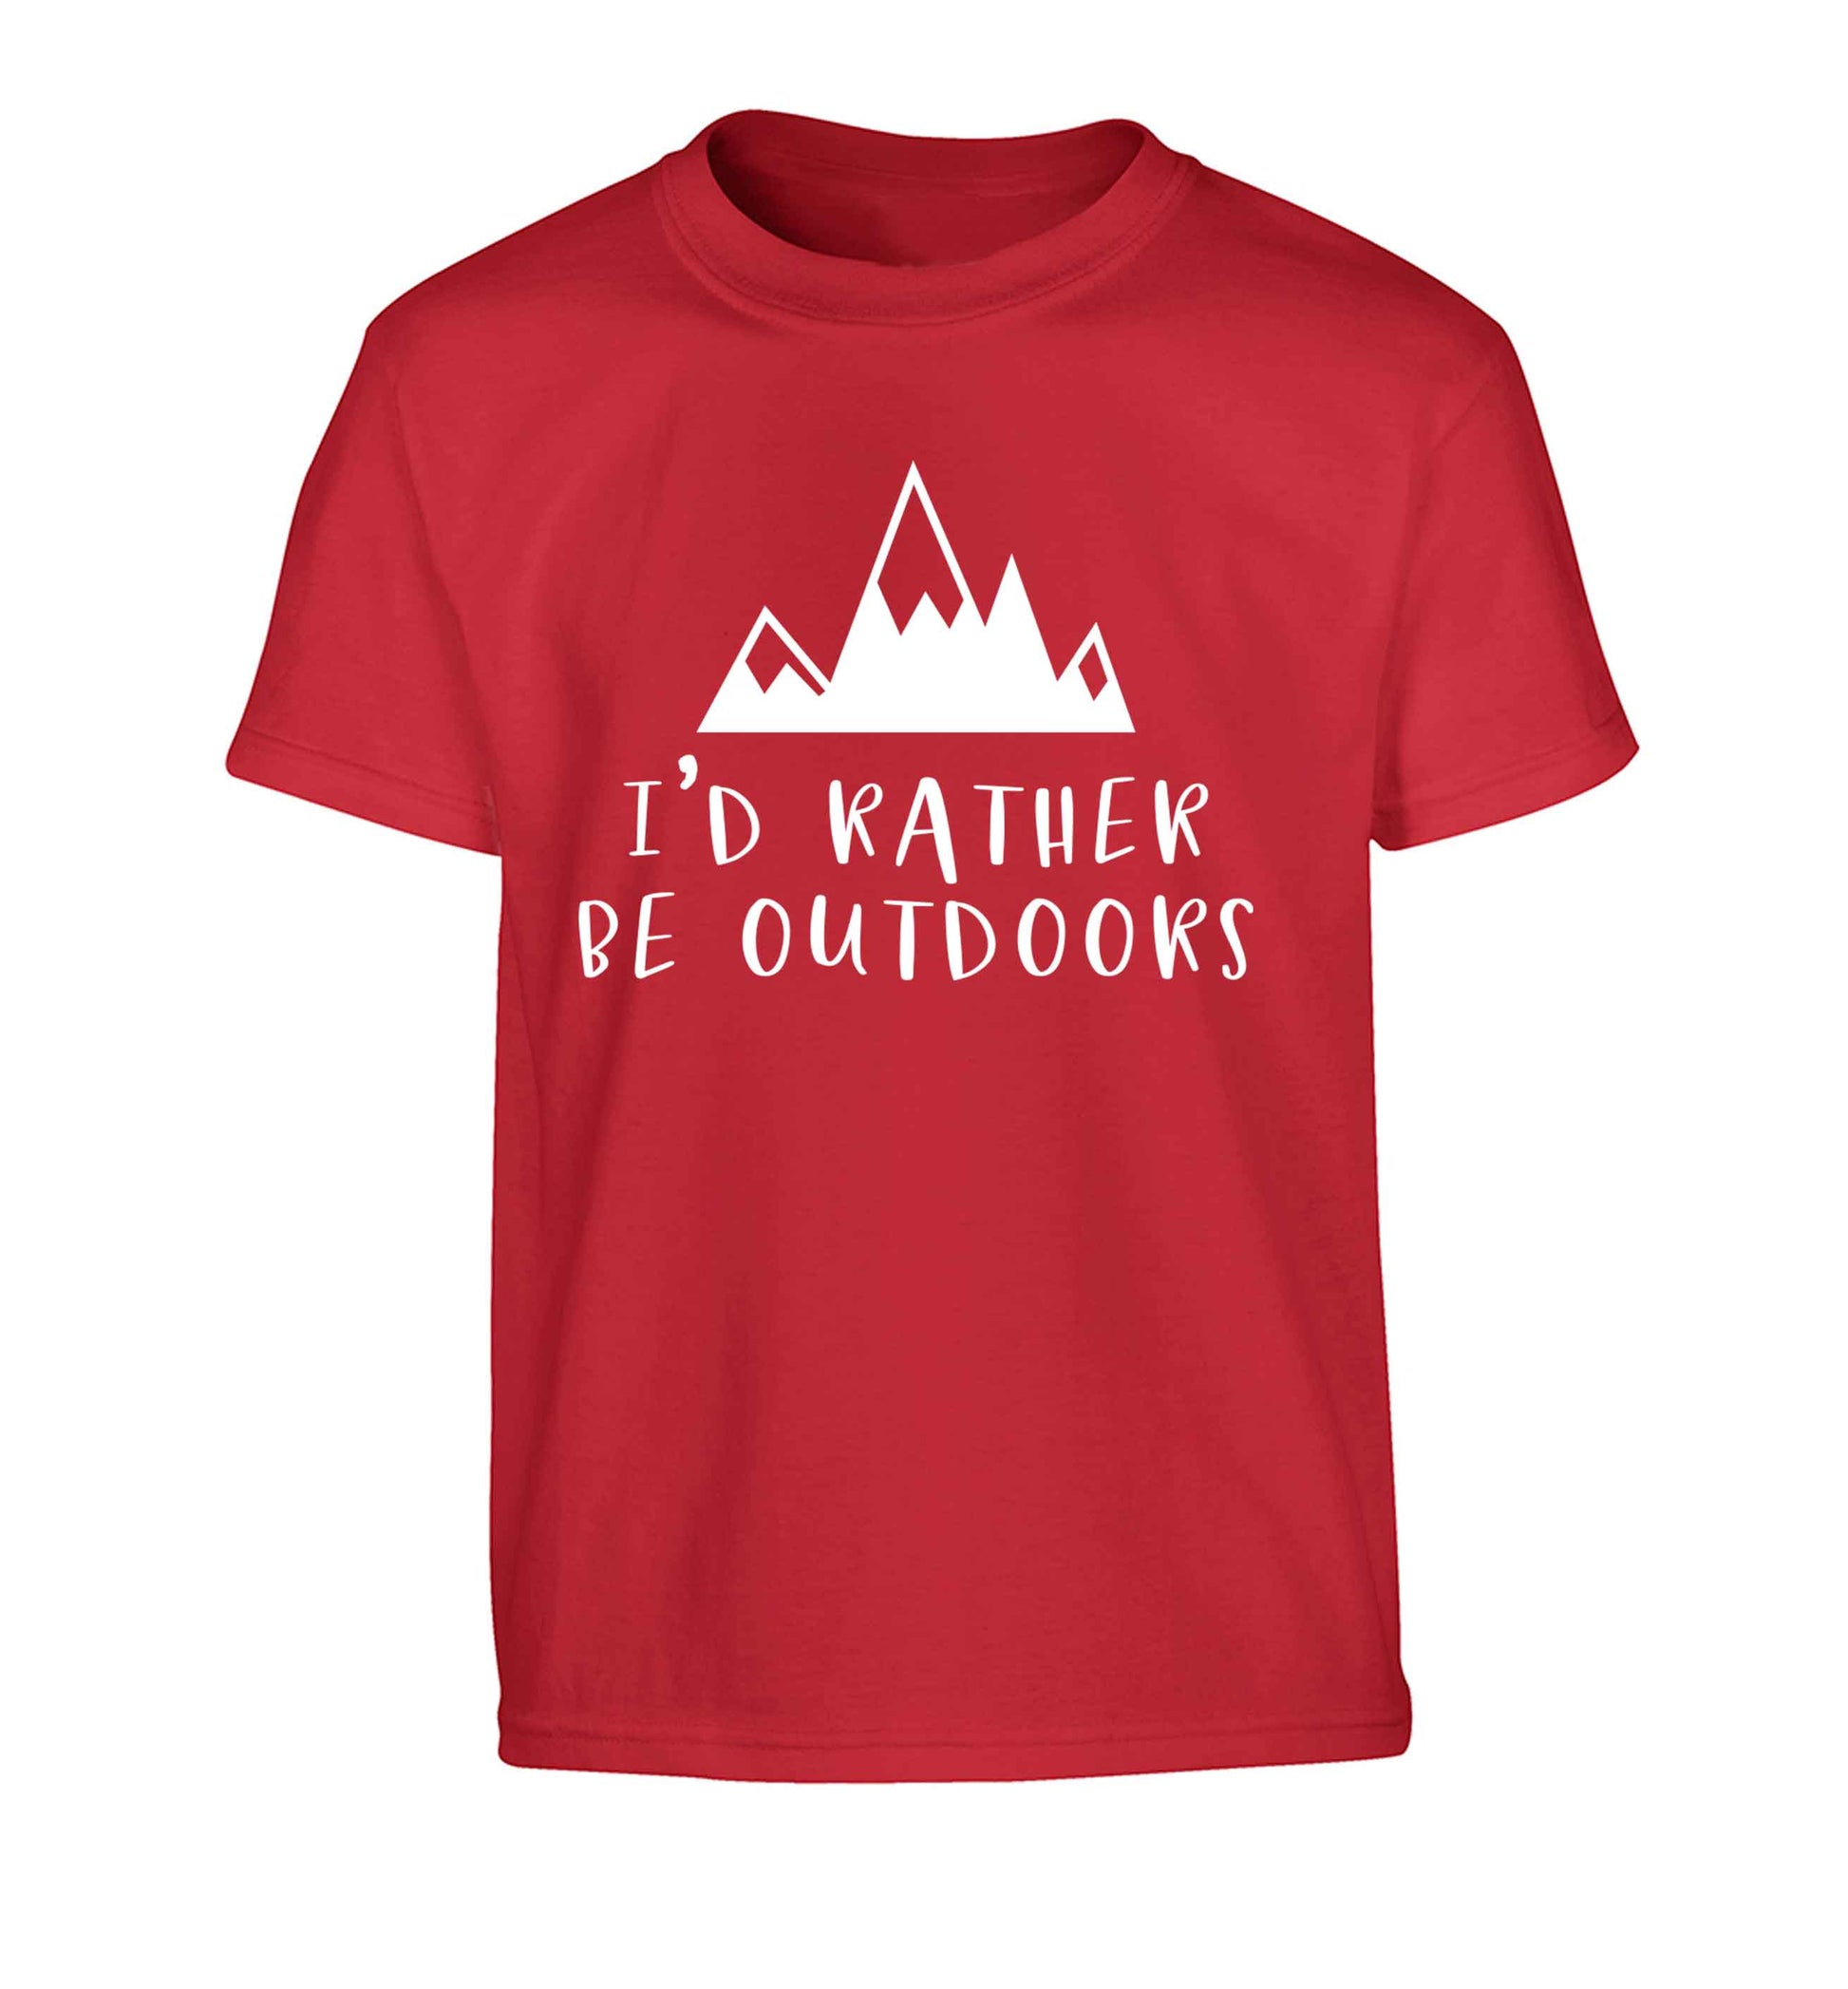 I'd rather be outdoors Children's red Tshirt 12-13 Years